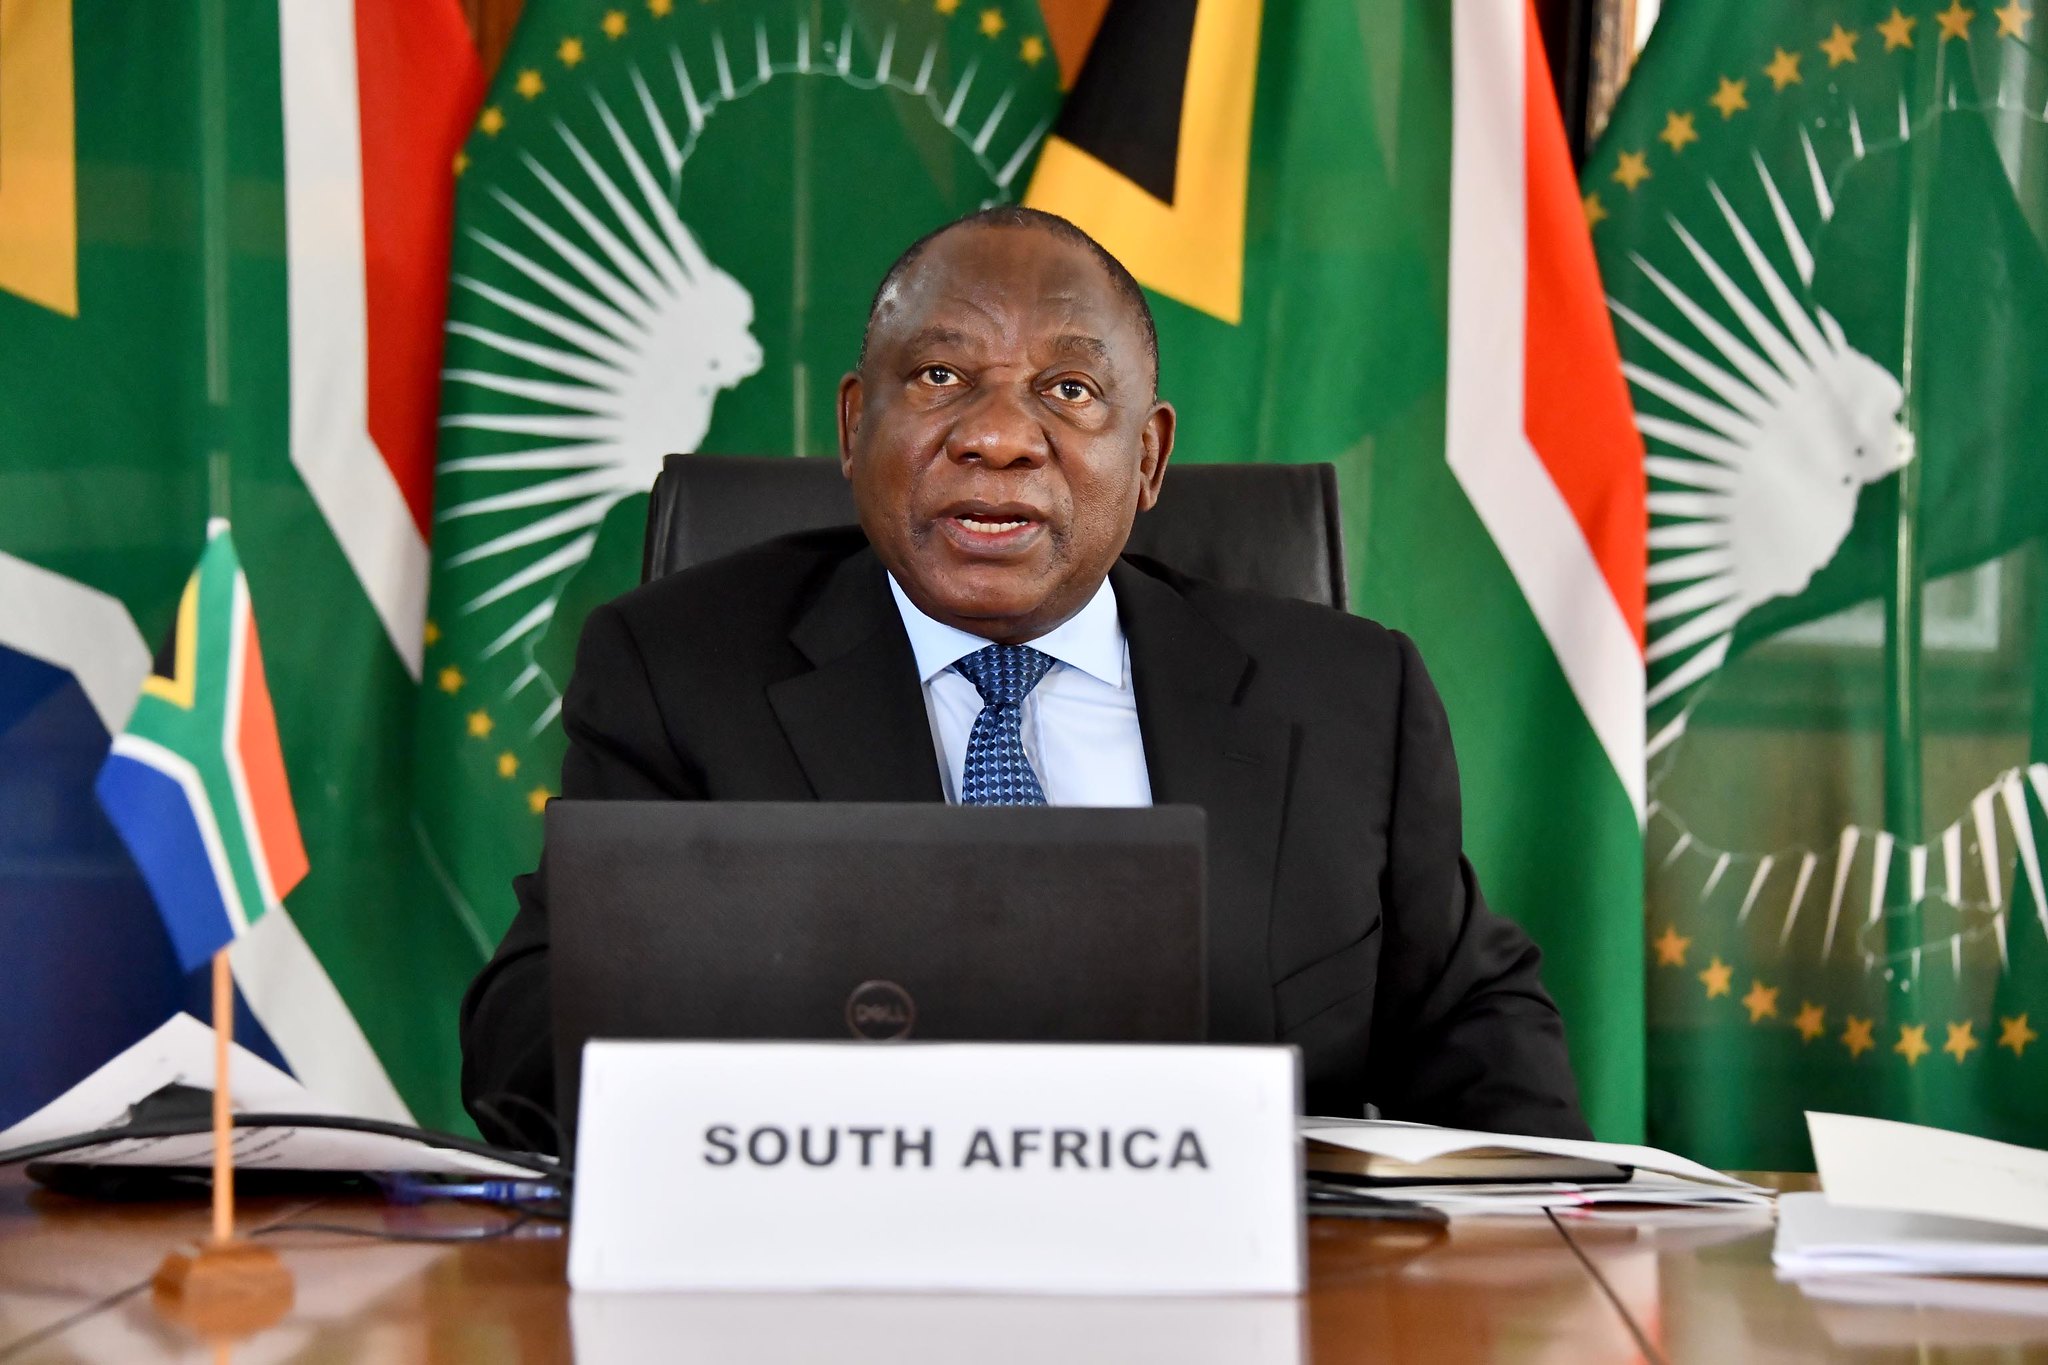 African Union chair pays tribute to the Prime Minister of eSwatini